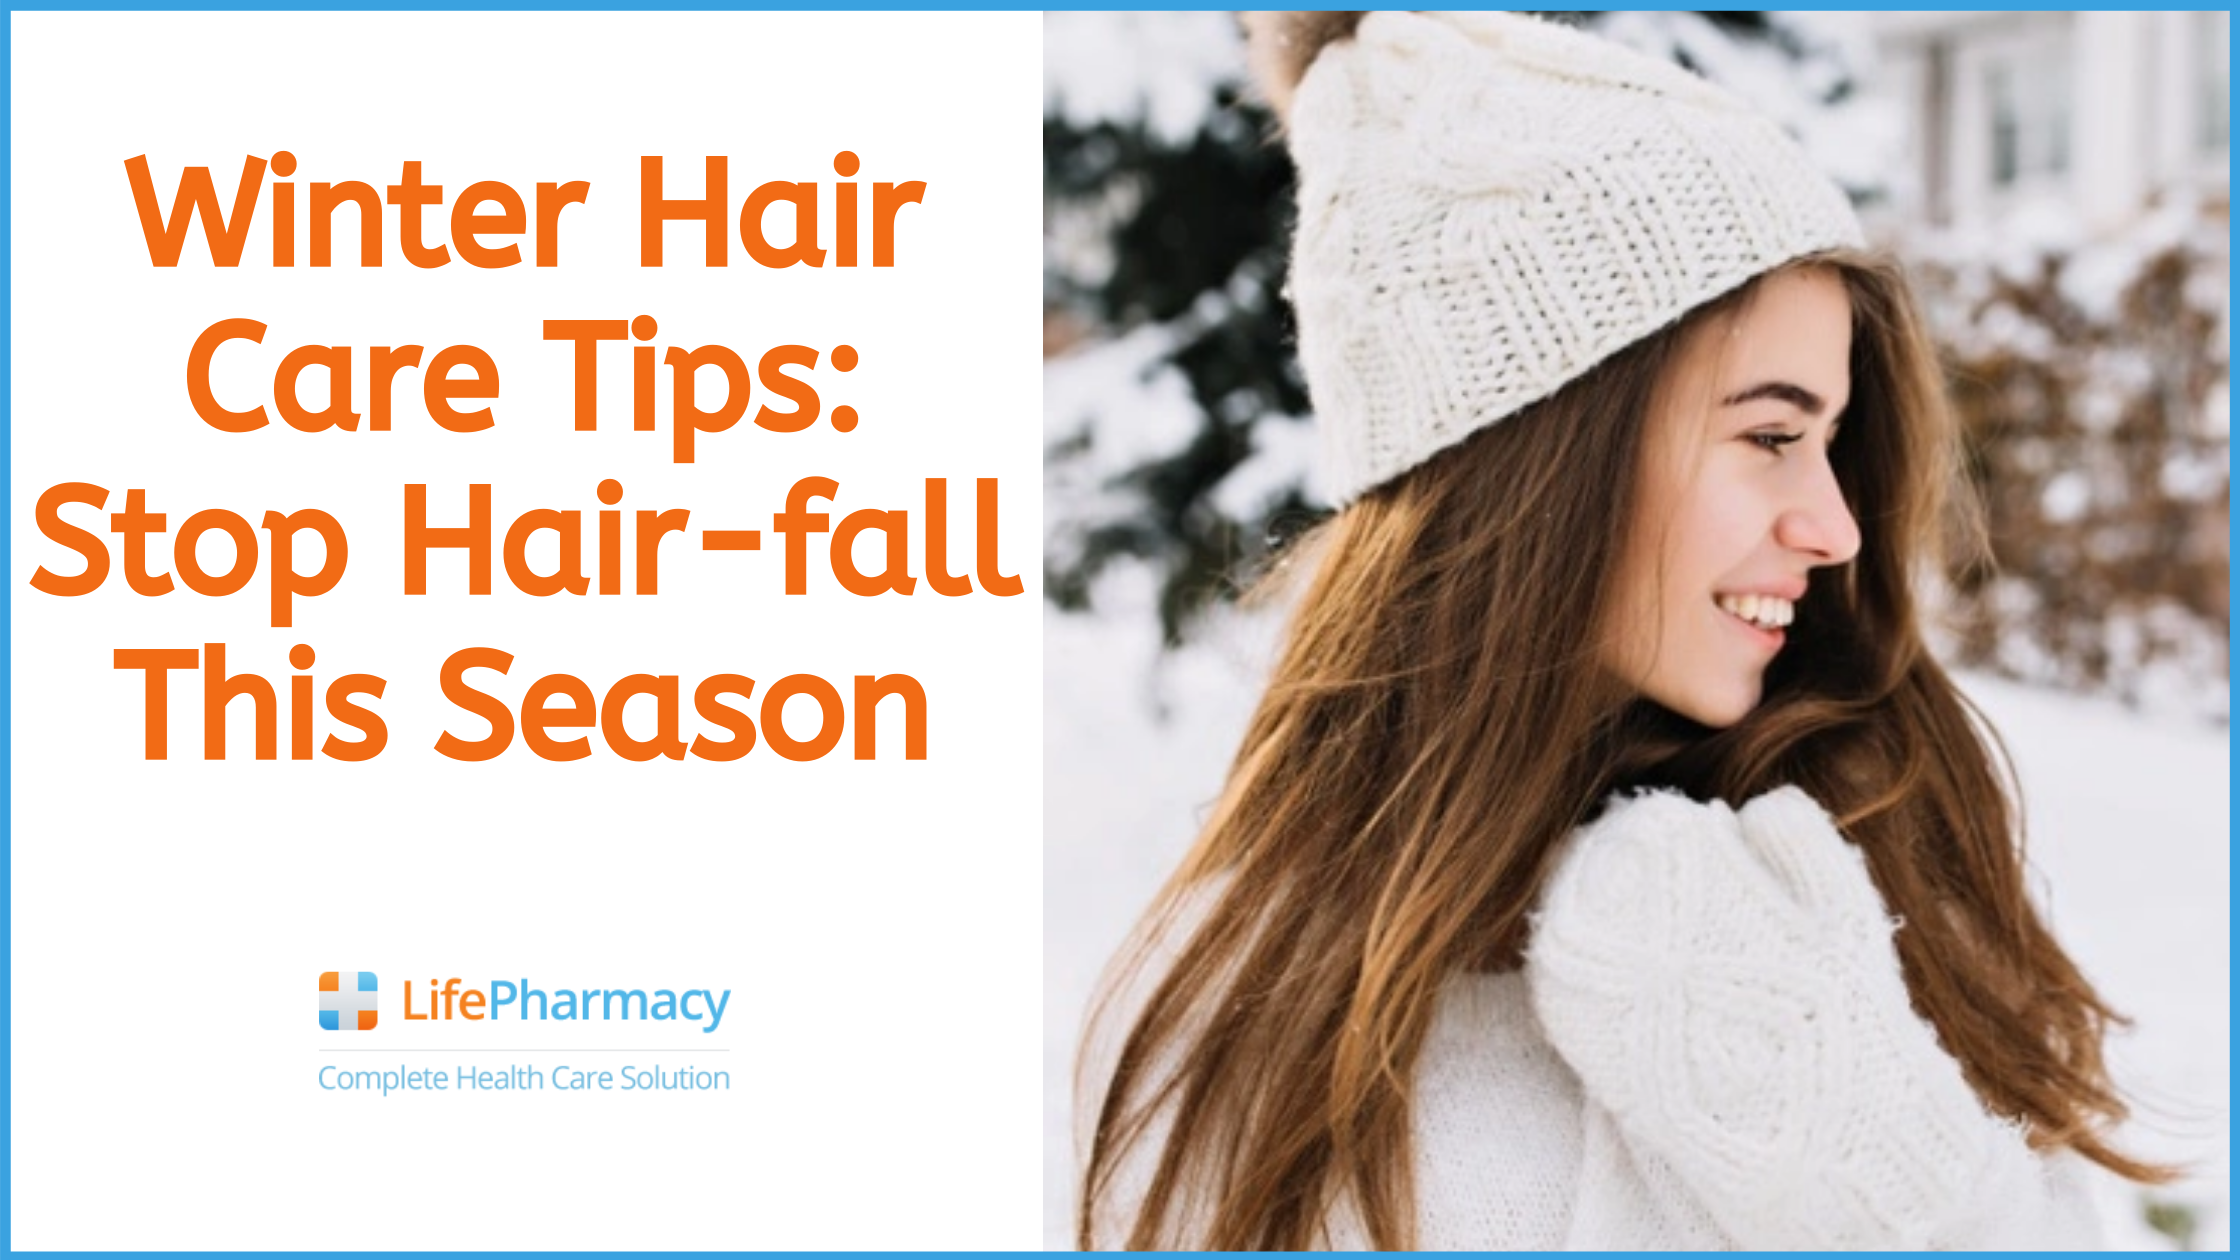 7. "Winter Hair Care Tips for Balayage Blondes" - wide 3